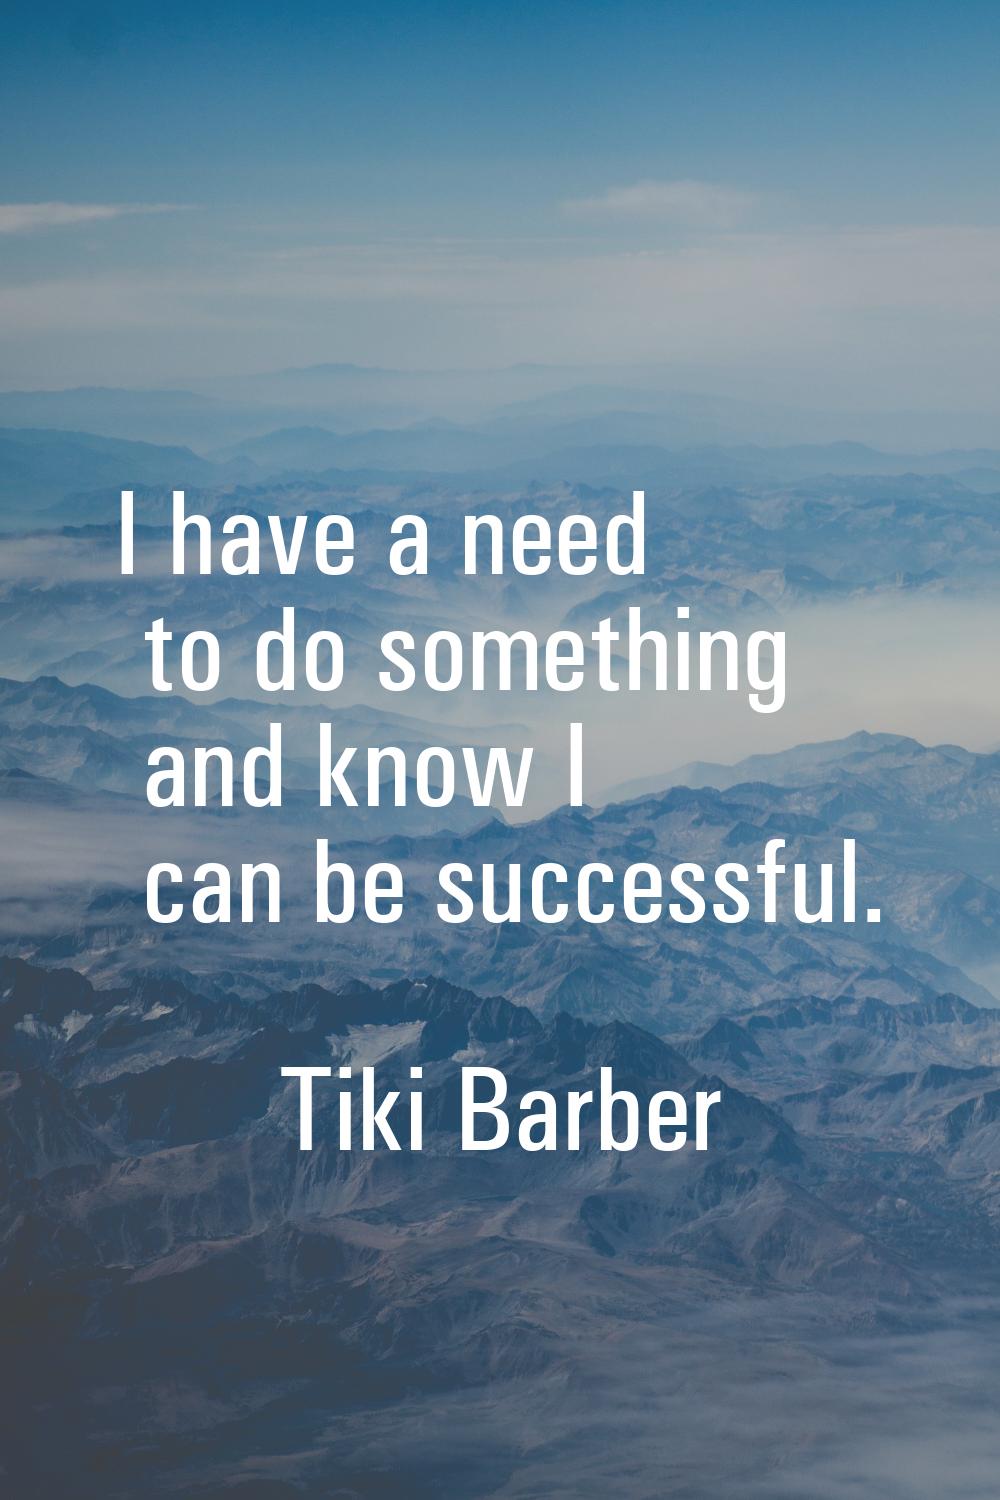 I have a need to do something and know I can be successful.